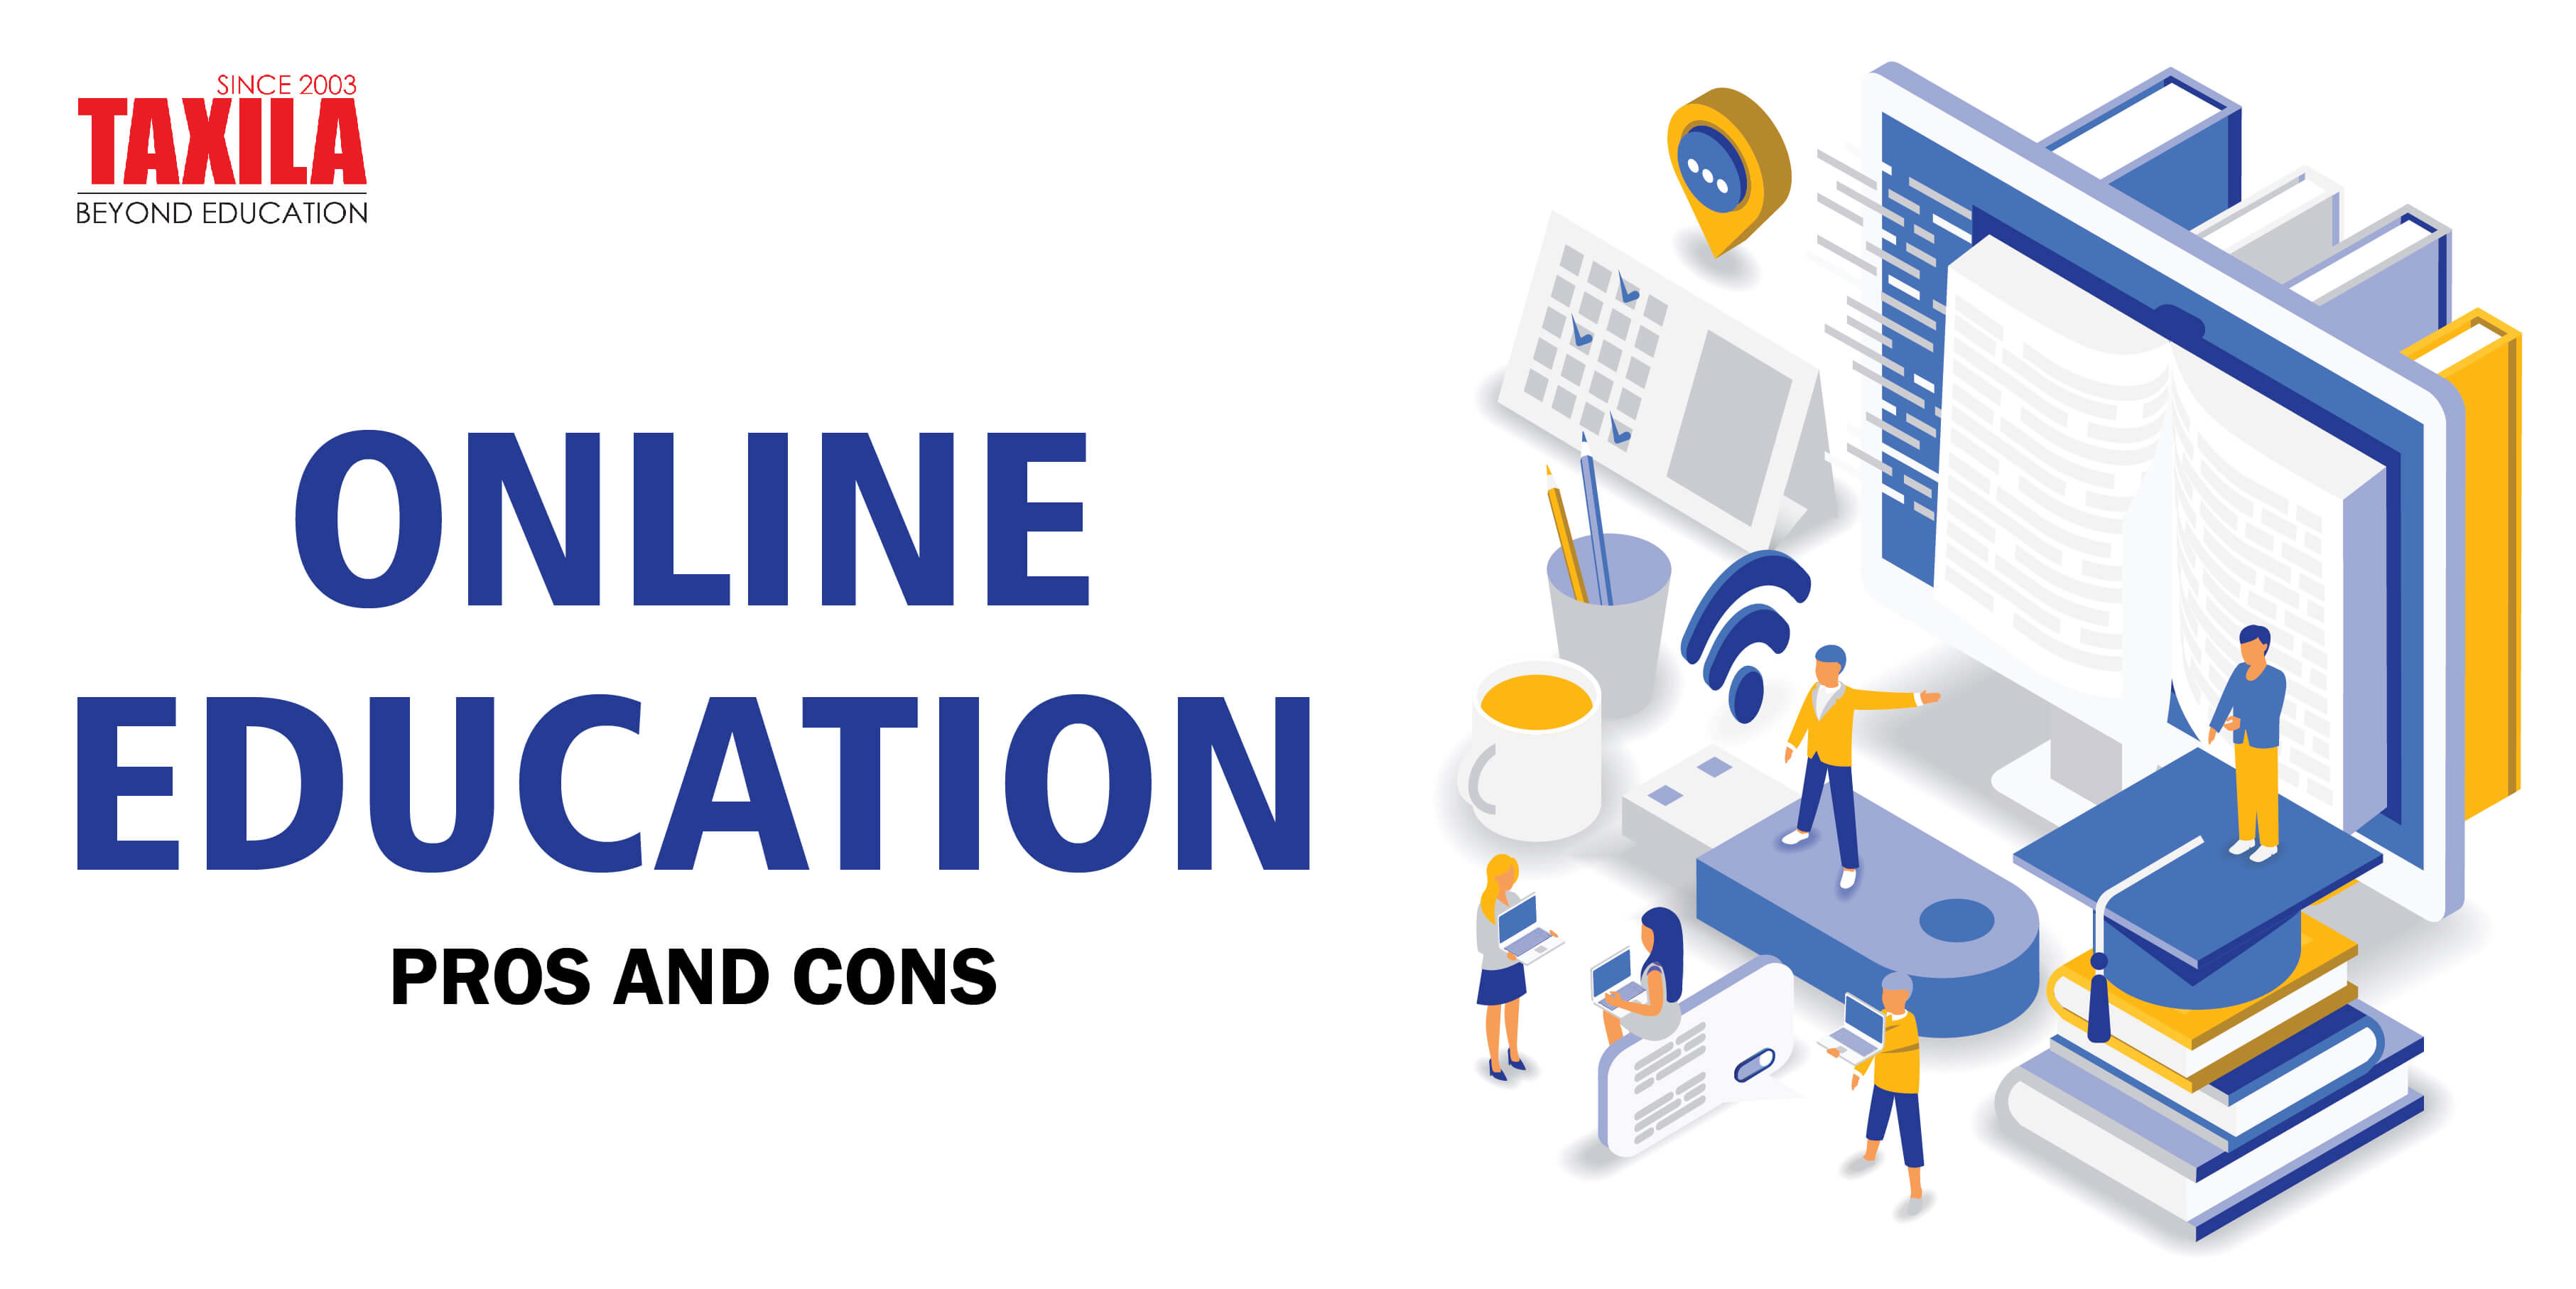 Online education: Pros and Cons